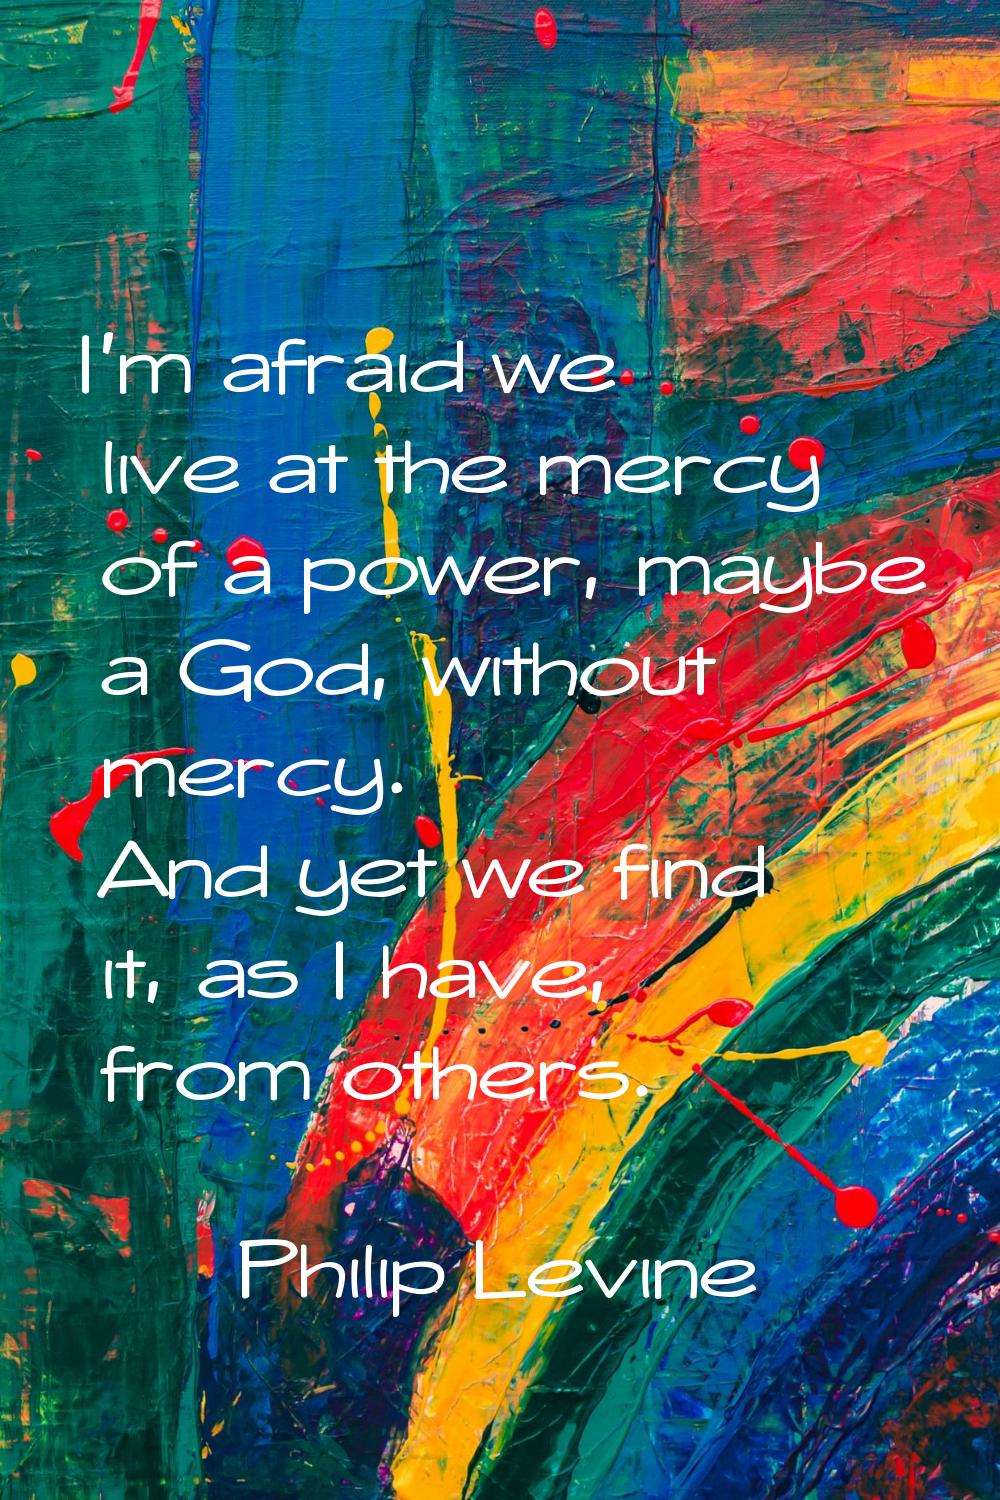 I'm afraid we live at the mercy of a power, maybe a God, without mercy. And yet we find it, as I ha